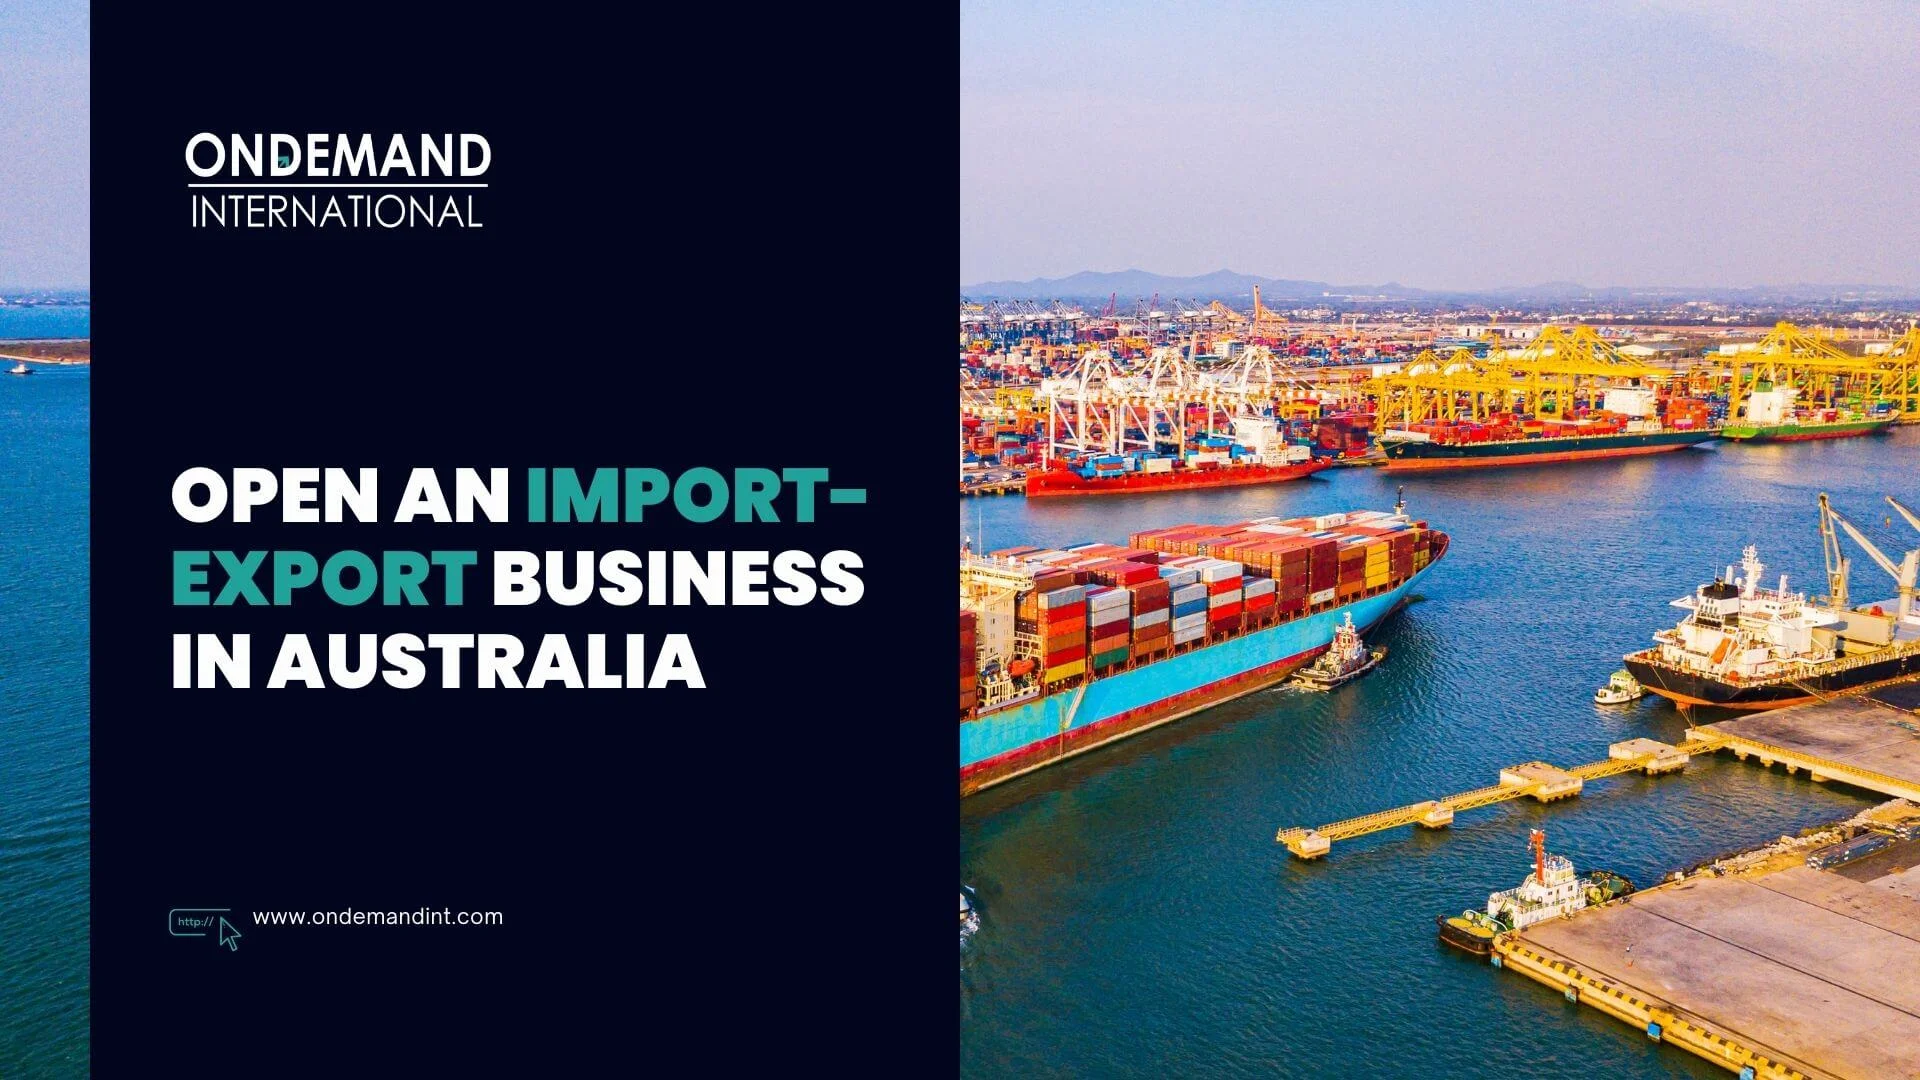 opening an import-export business in australia